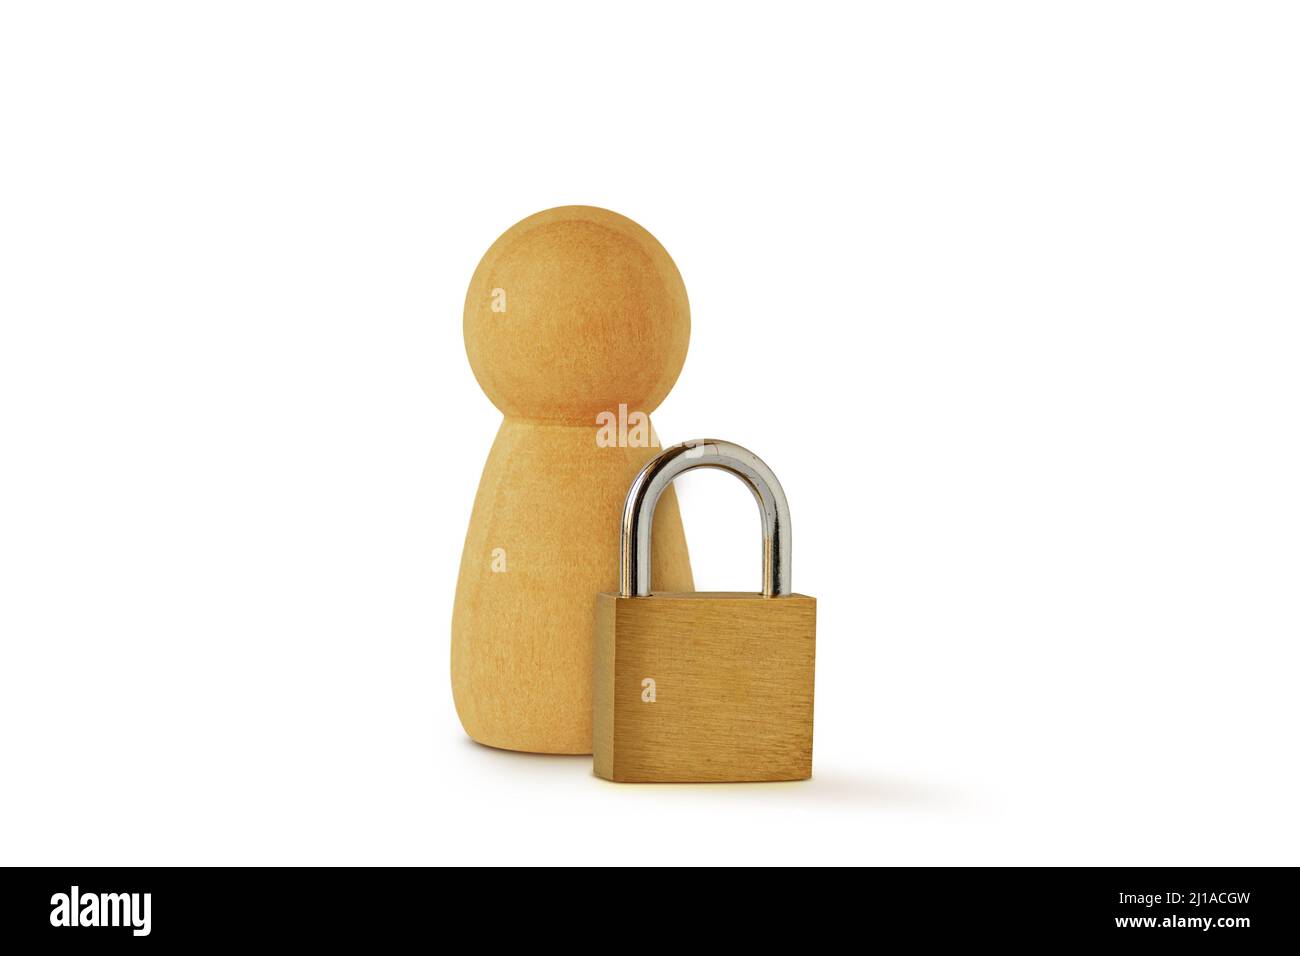 Pawn with padlock - Concept of account protection, blocked user account Stock Photo